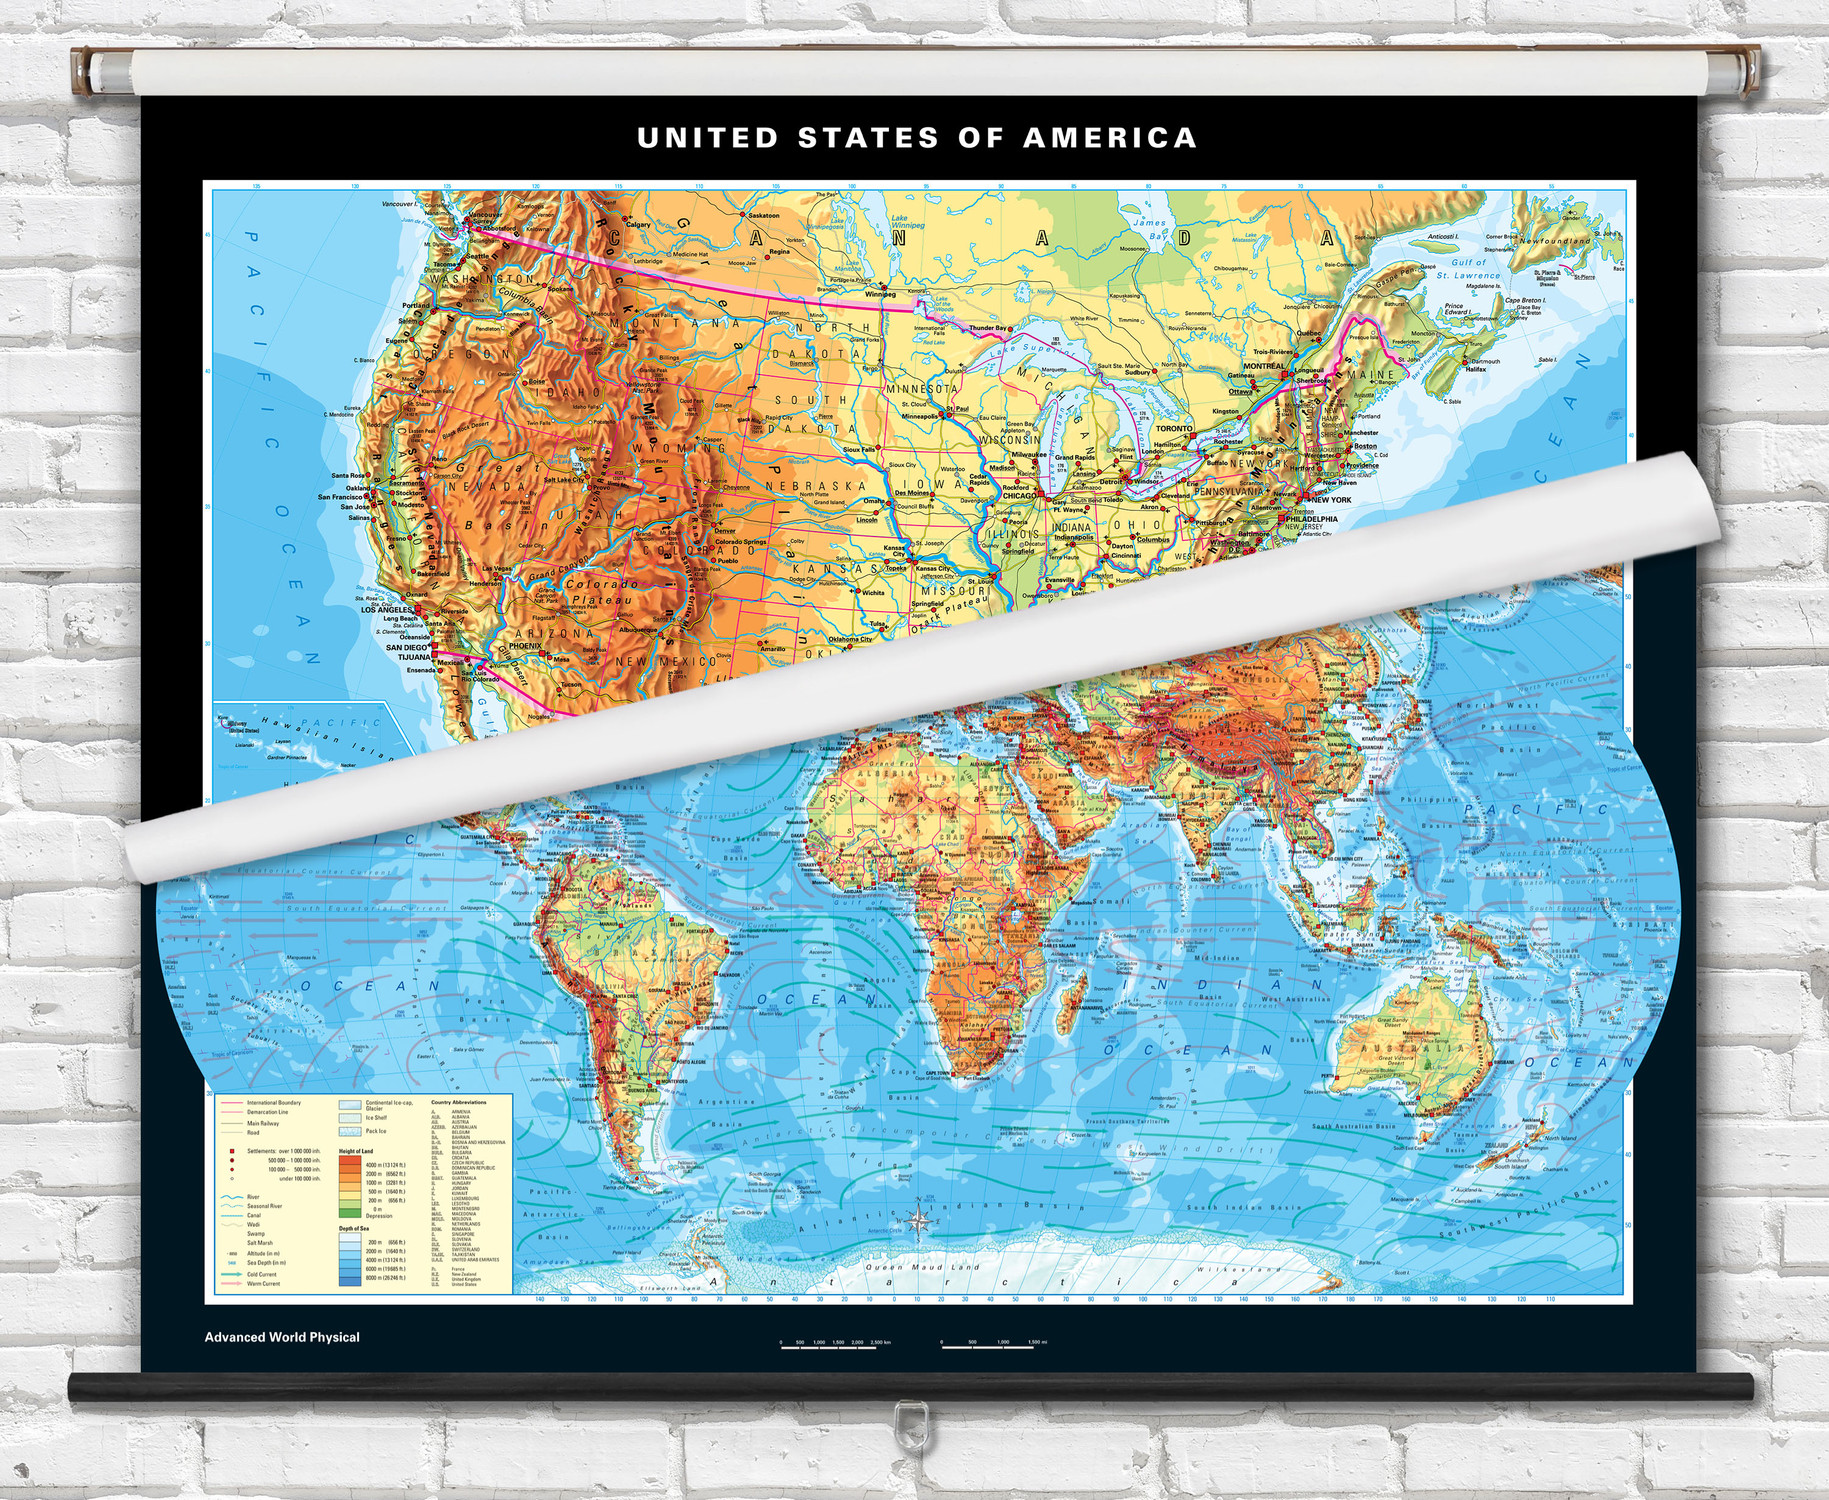 Advanced U.S. & World Physical Spring Roller Map Combo Set from Klett-Perthes